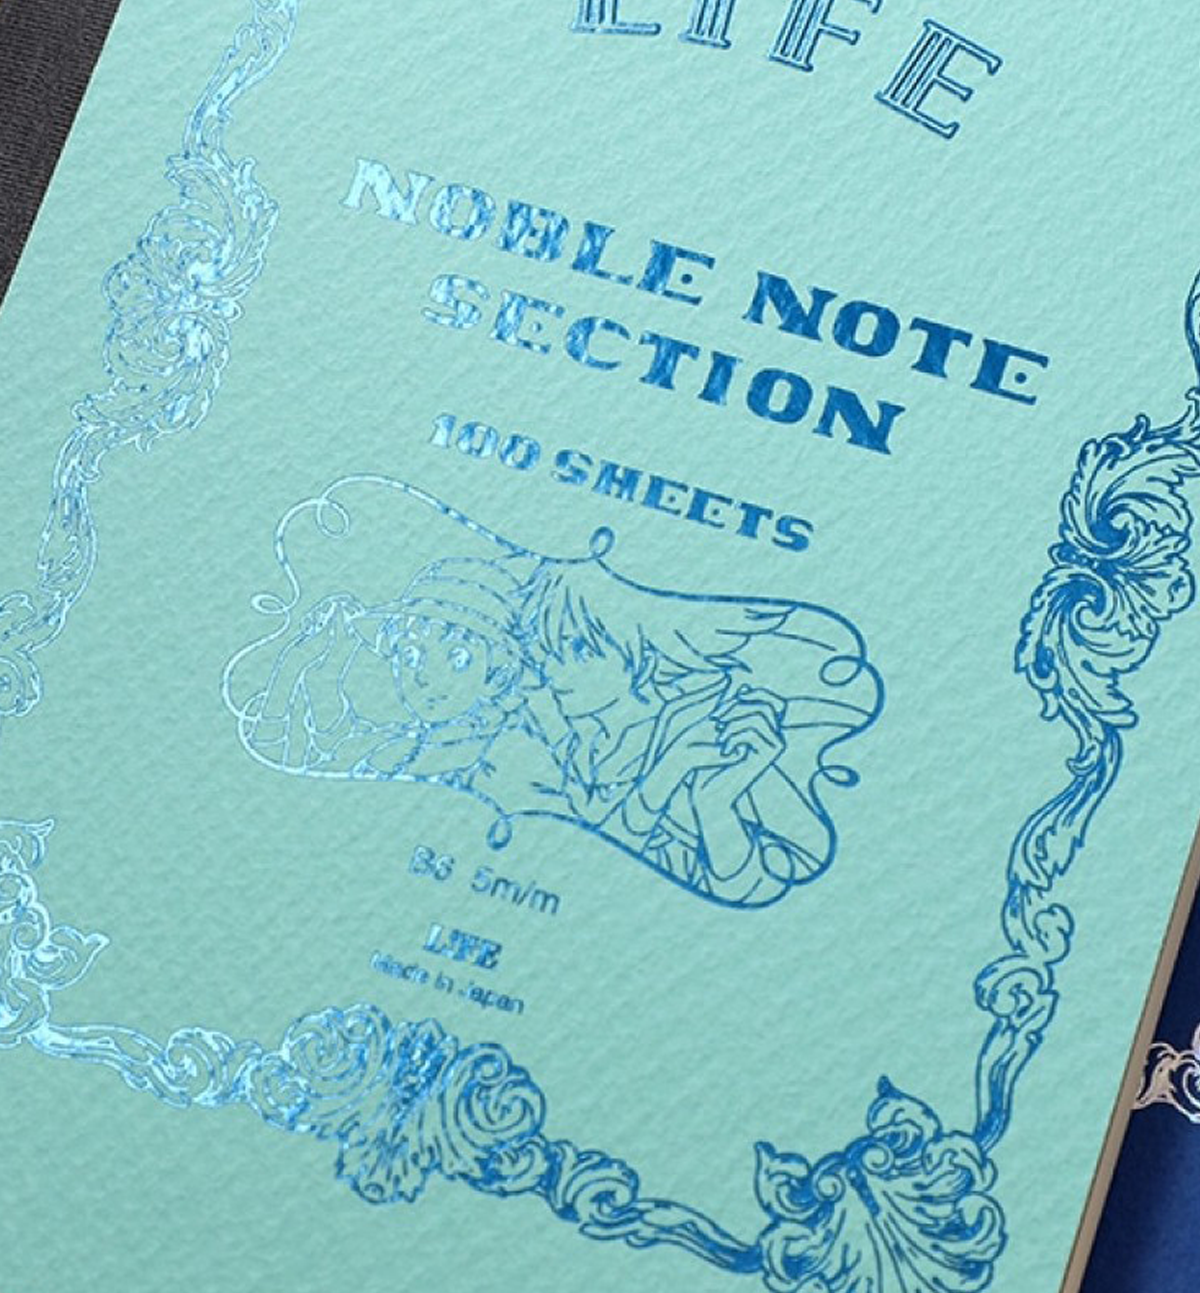 Howl's Moving Castle Notebook [Life]